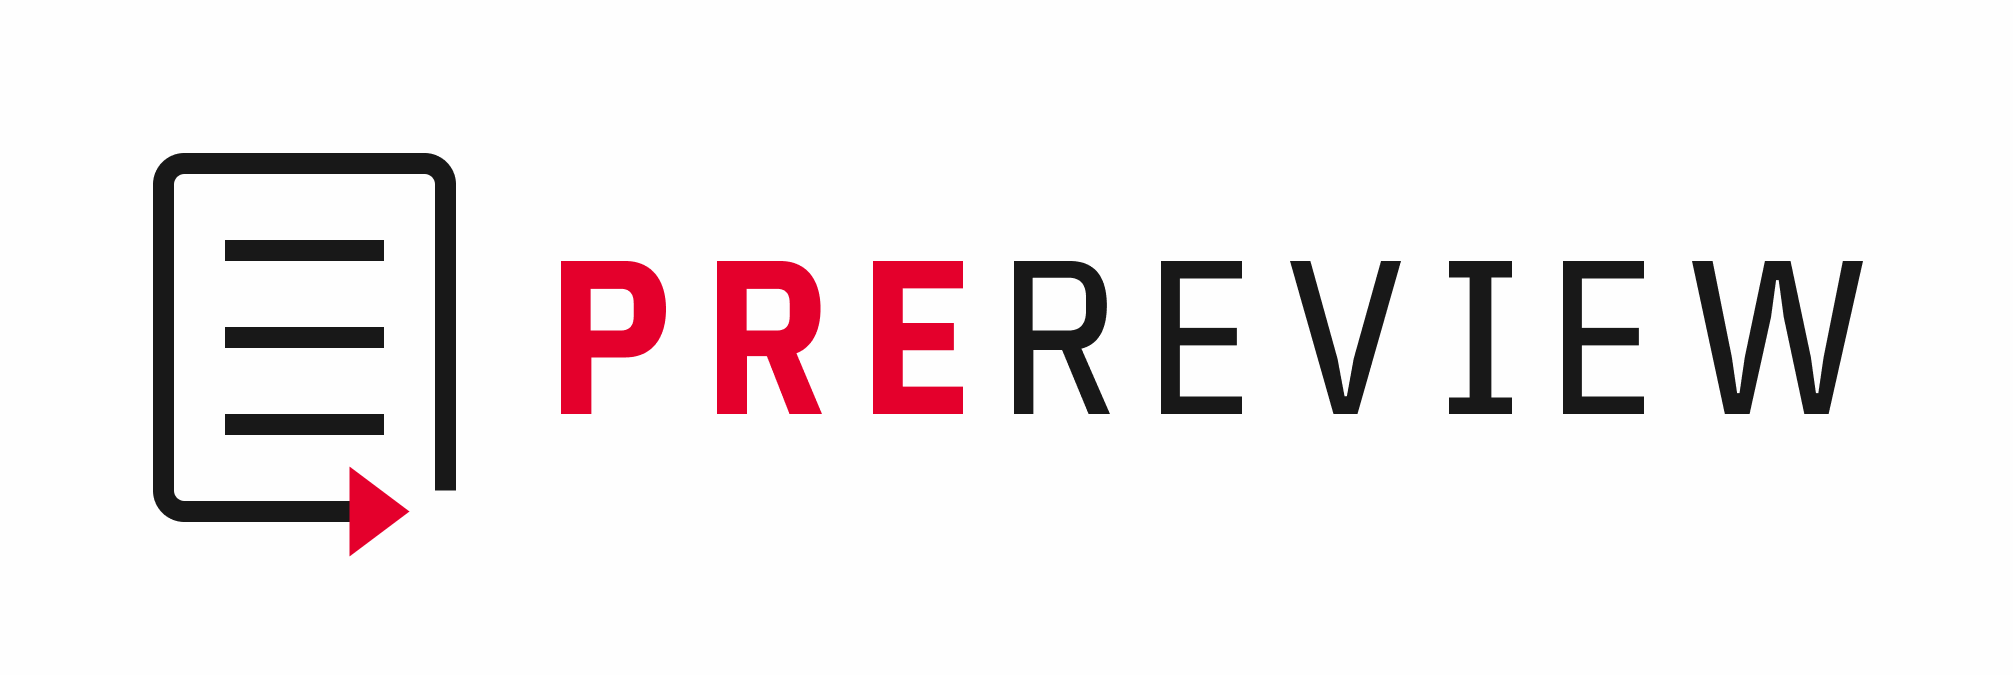 PREreview's logo which shows a stylized paper with an arrow pointing leftwards from its bottom edge towards the word "PREREVIEW" in all caps